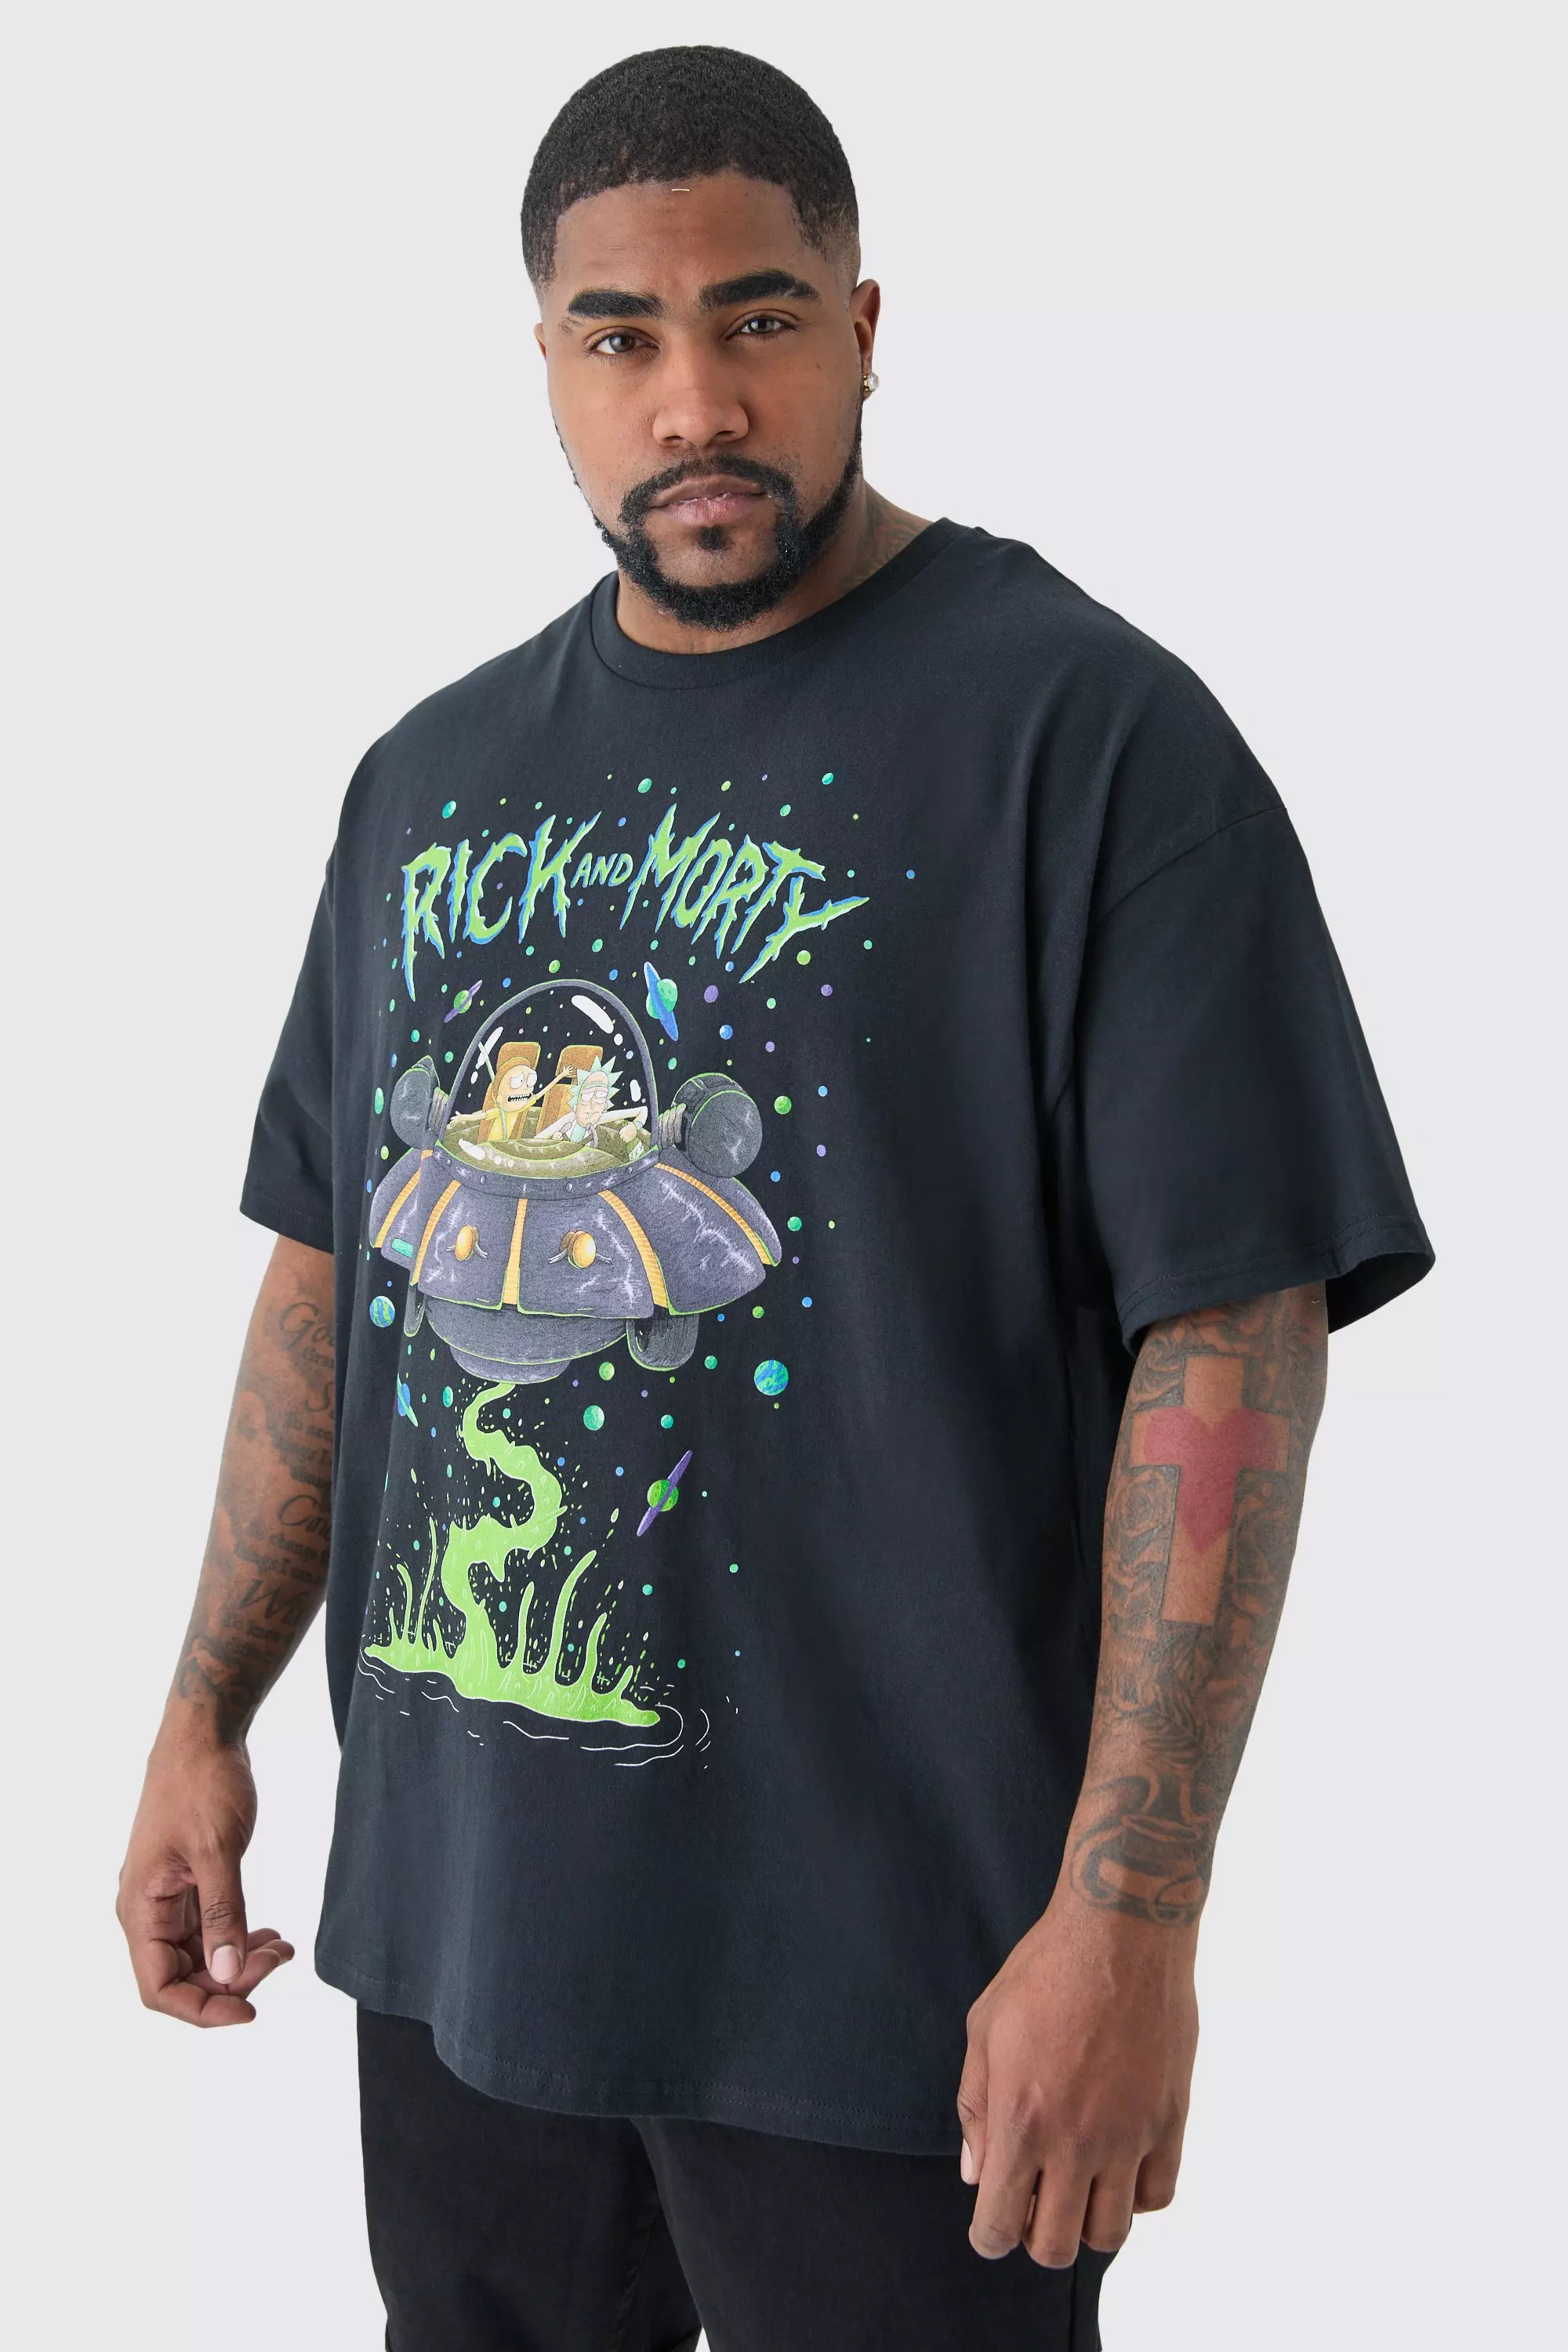 Plus Rick And Morty T-shirt In Black Black